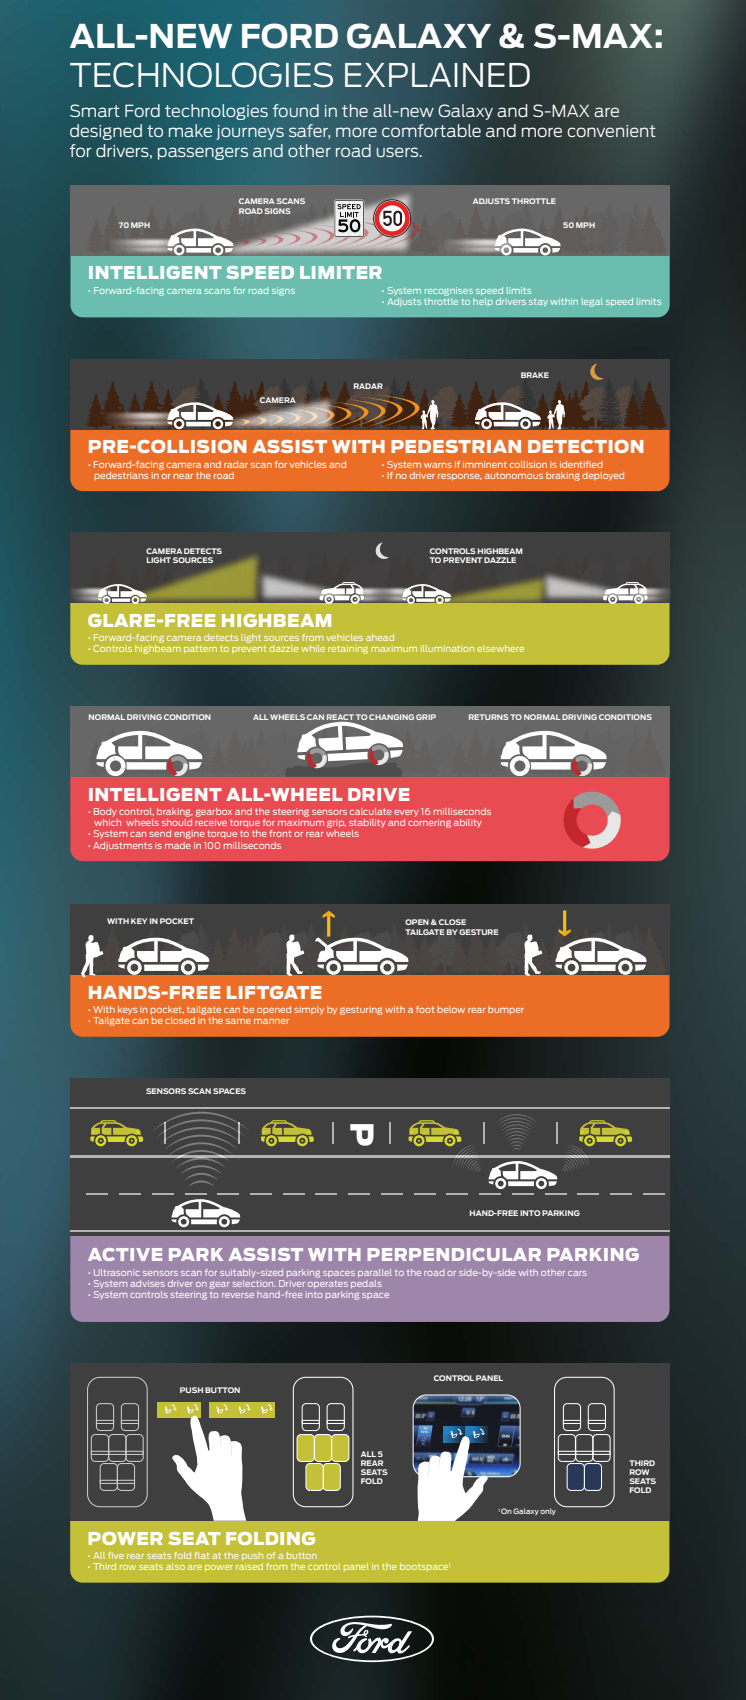 Teknologisk infographic over Ford S-MAX & Ford Galaxy